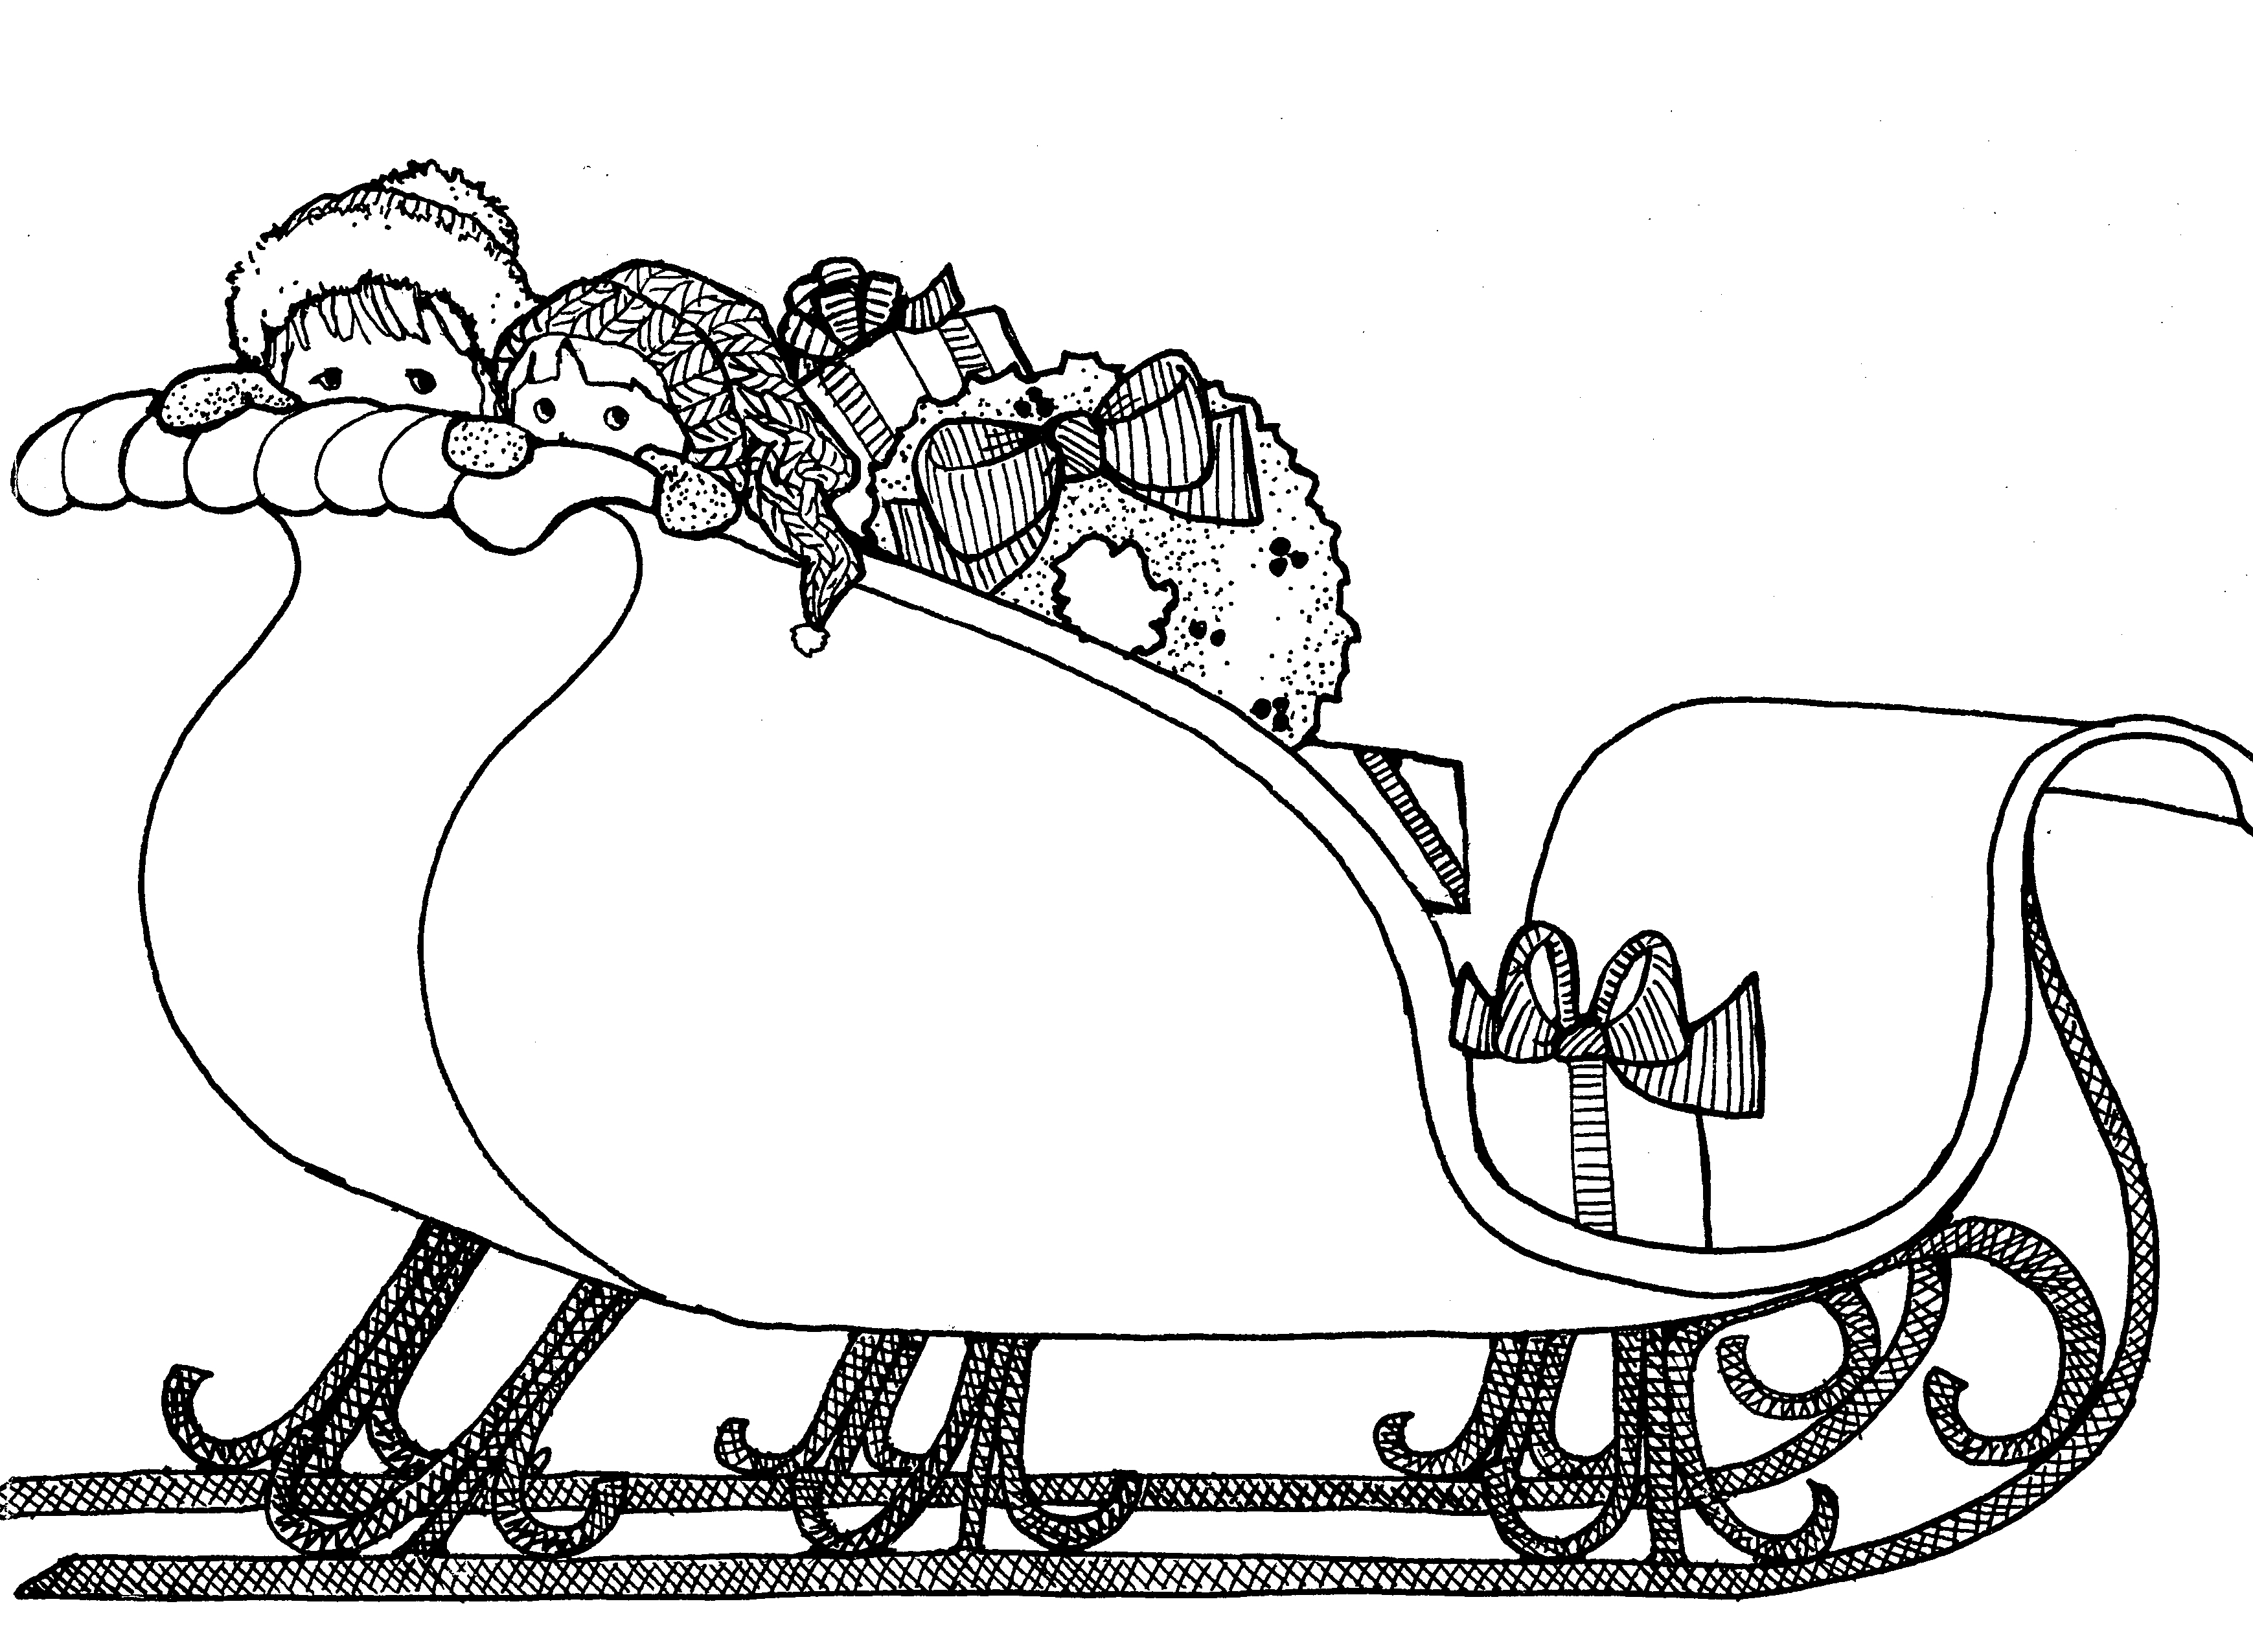 12 Sleigh Pictures Free Cliparts That You Can Download To You Computer